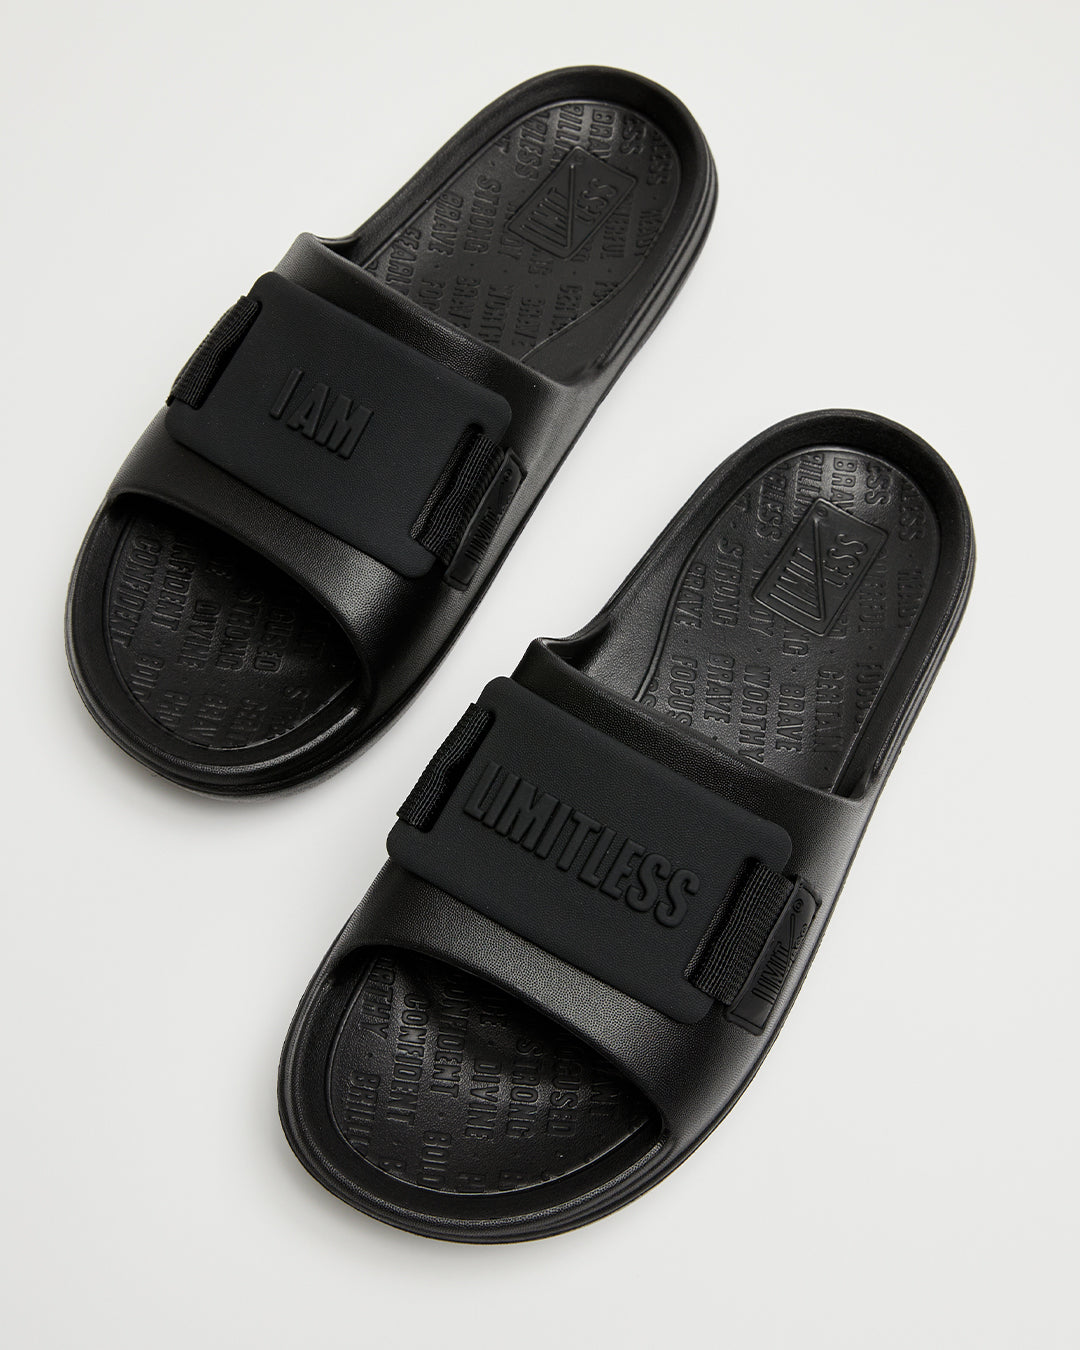 LIMITLESS SLIDES™ WITH ESSENTIAL TIBAH™ QUAD - GARDEN CITY EDITION